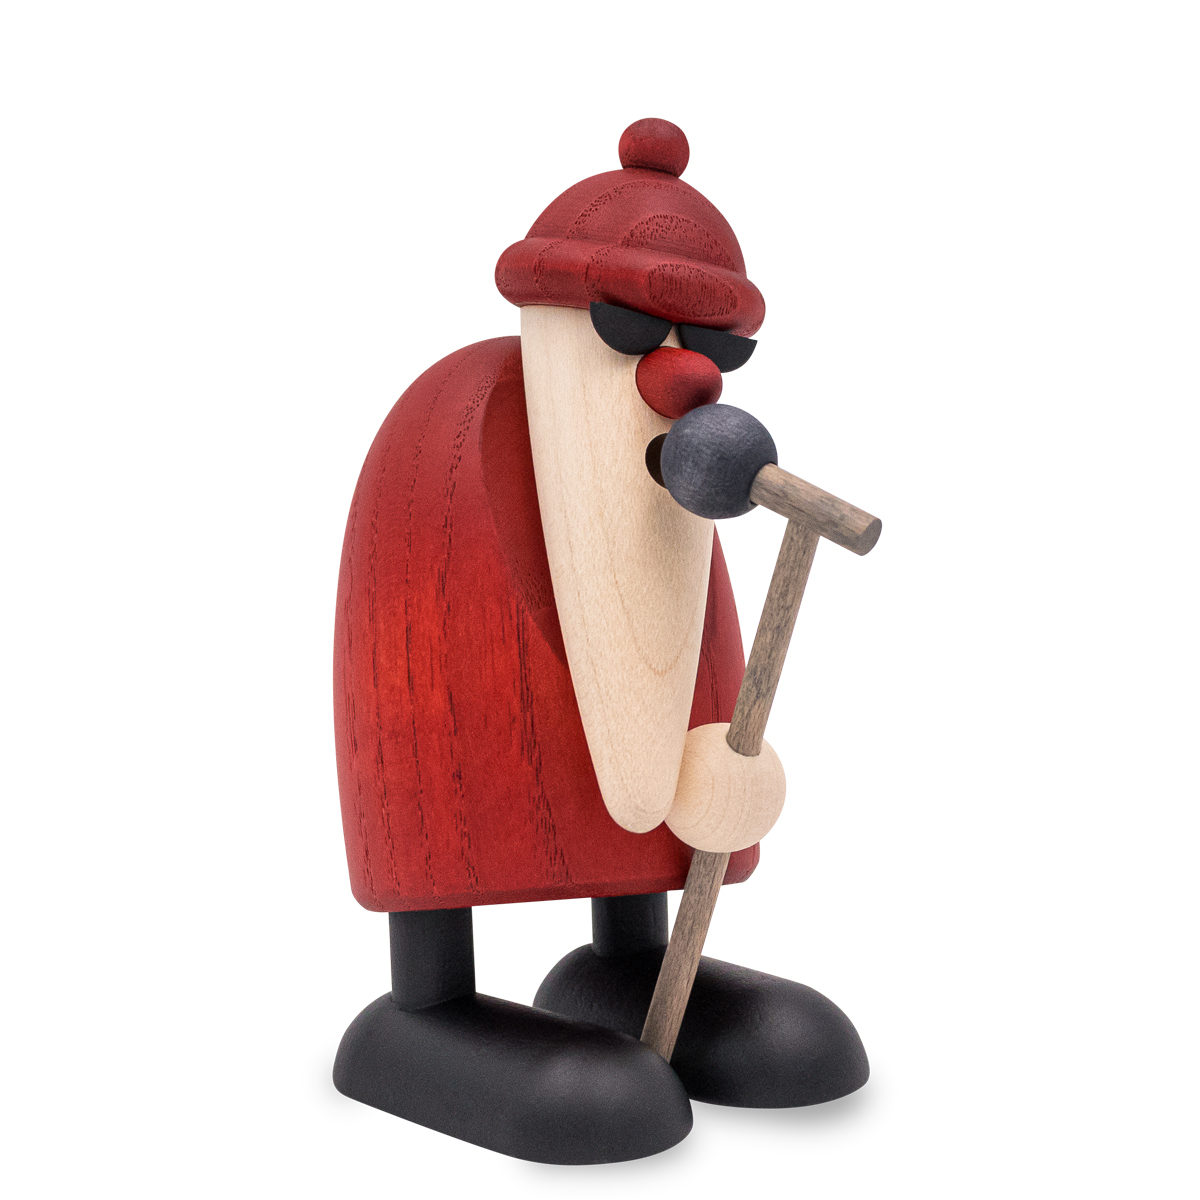 Introvert Santa Claus at the microphone